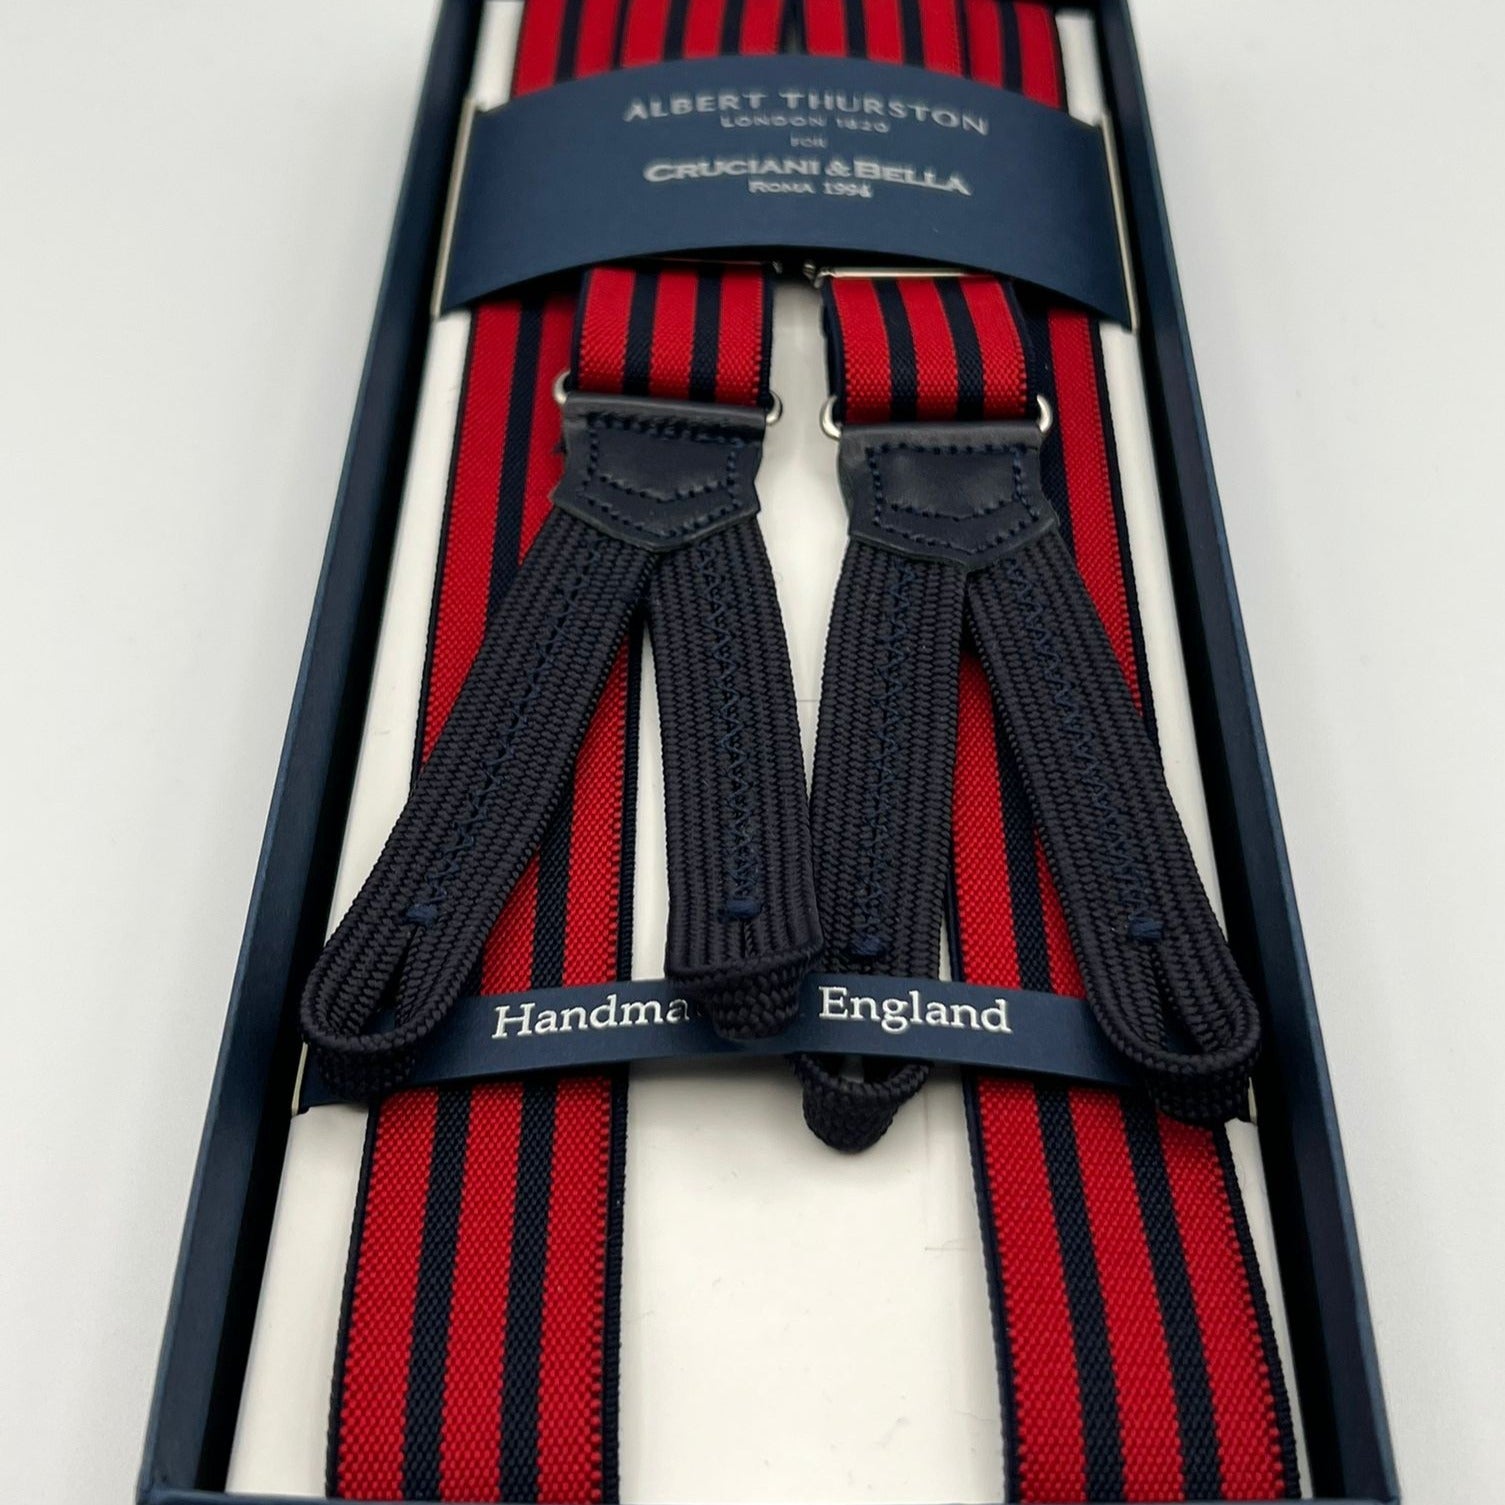 Albert Thurston for Cruciani & Bella Made in England Adjustable Sizing 25 mm elastic braces Red, Blue Stripes Braid ends Y-Shaped Nickel  Fittings Size: L #7474